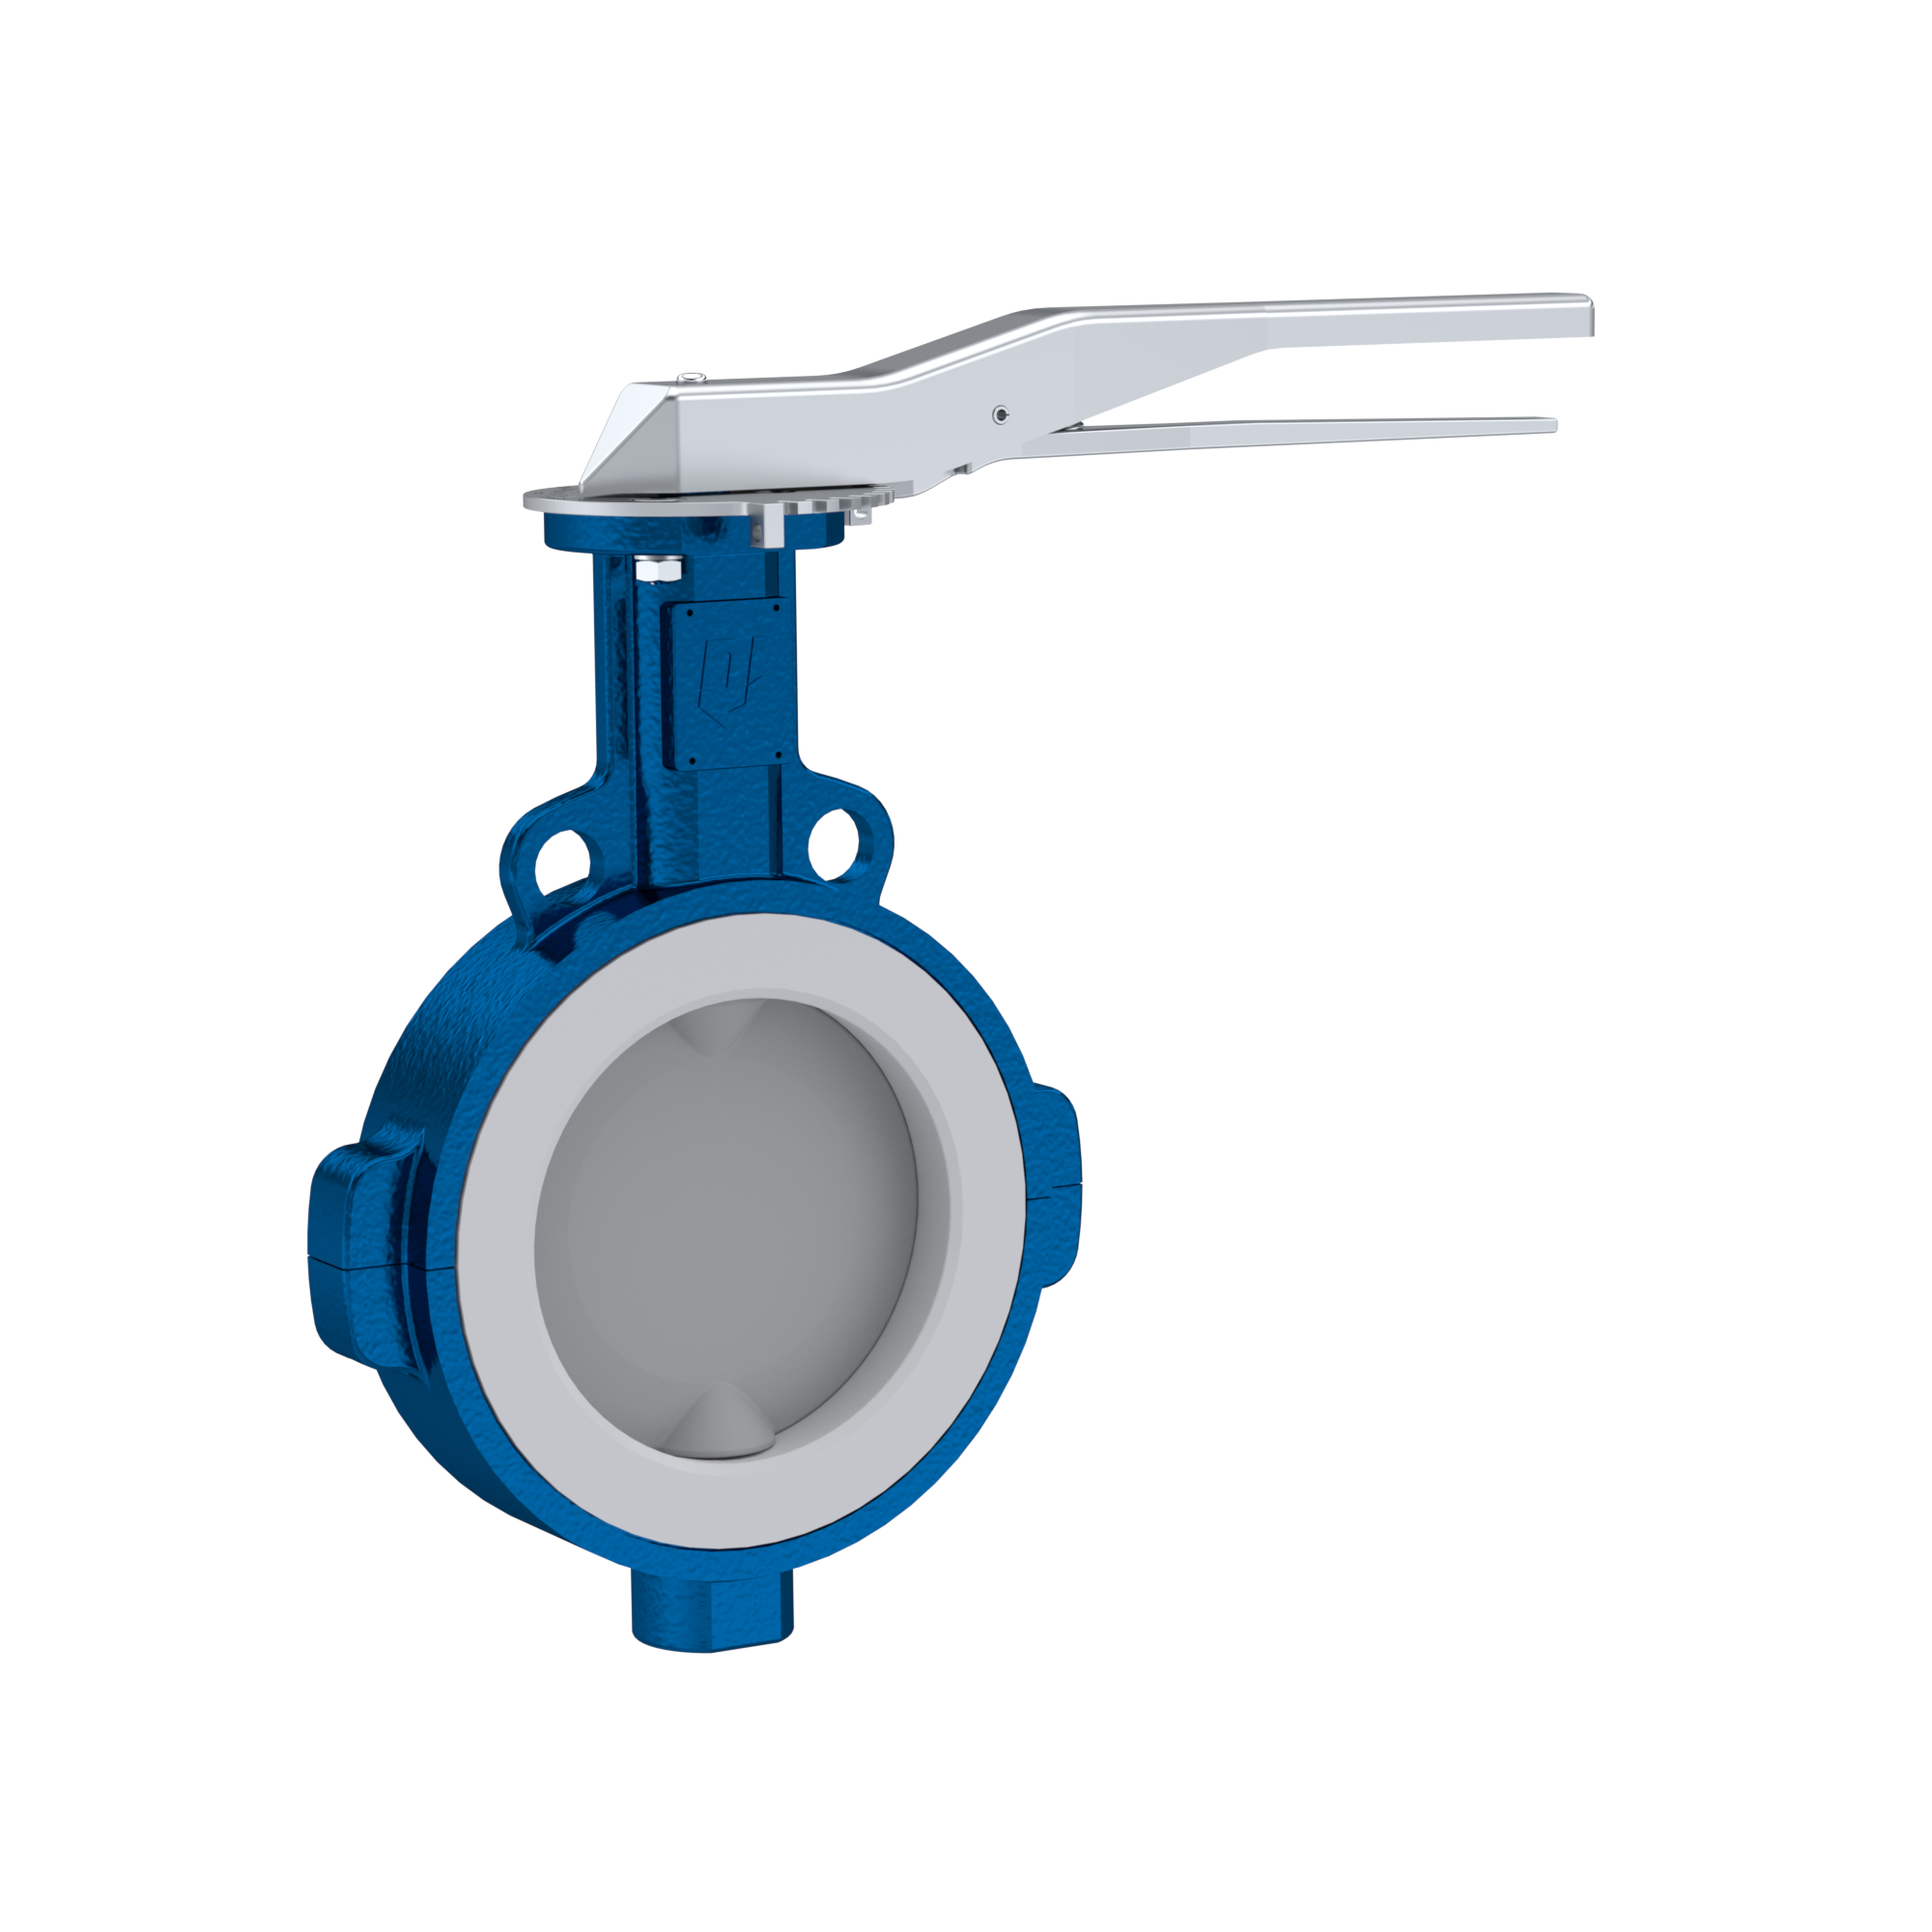 PFA-Butterfly-valve PTFE AK09 DN300 PN10-PN16 lever silicone insert